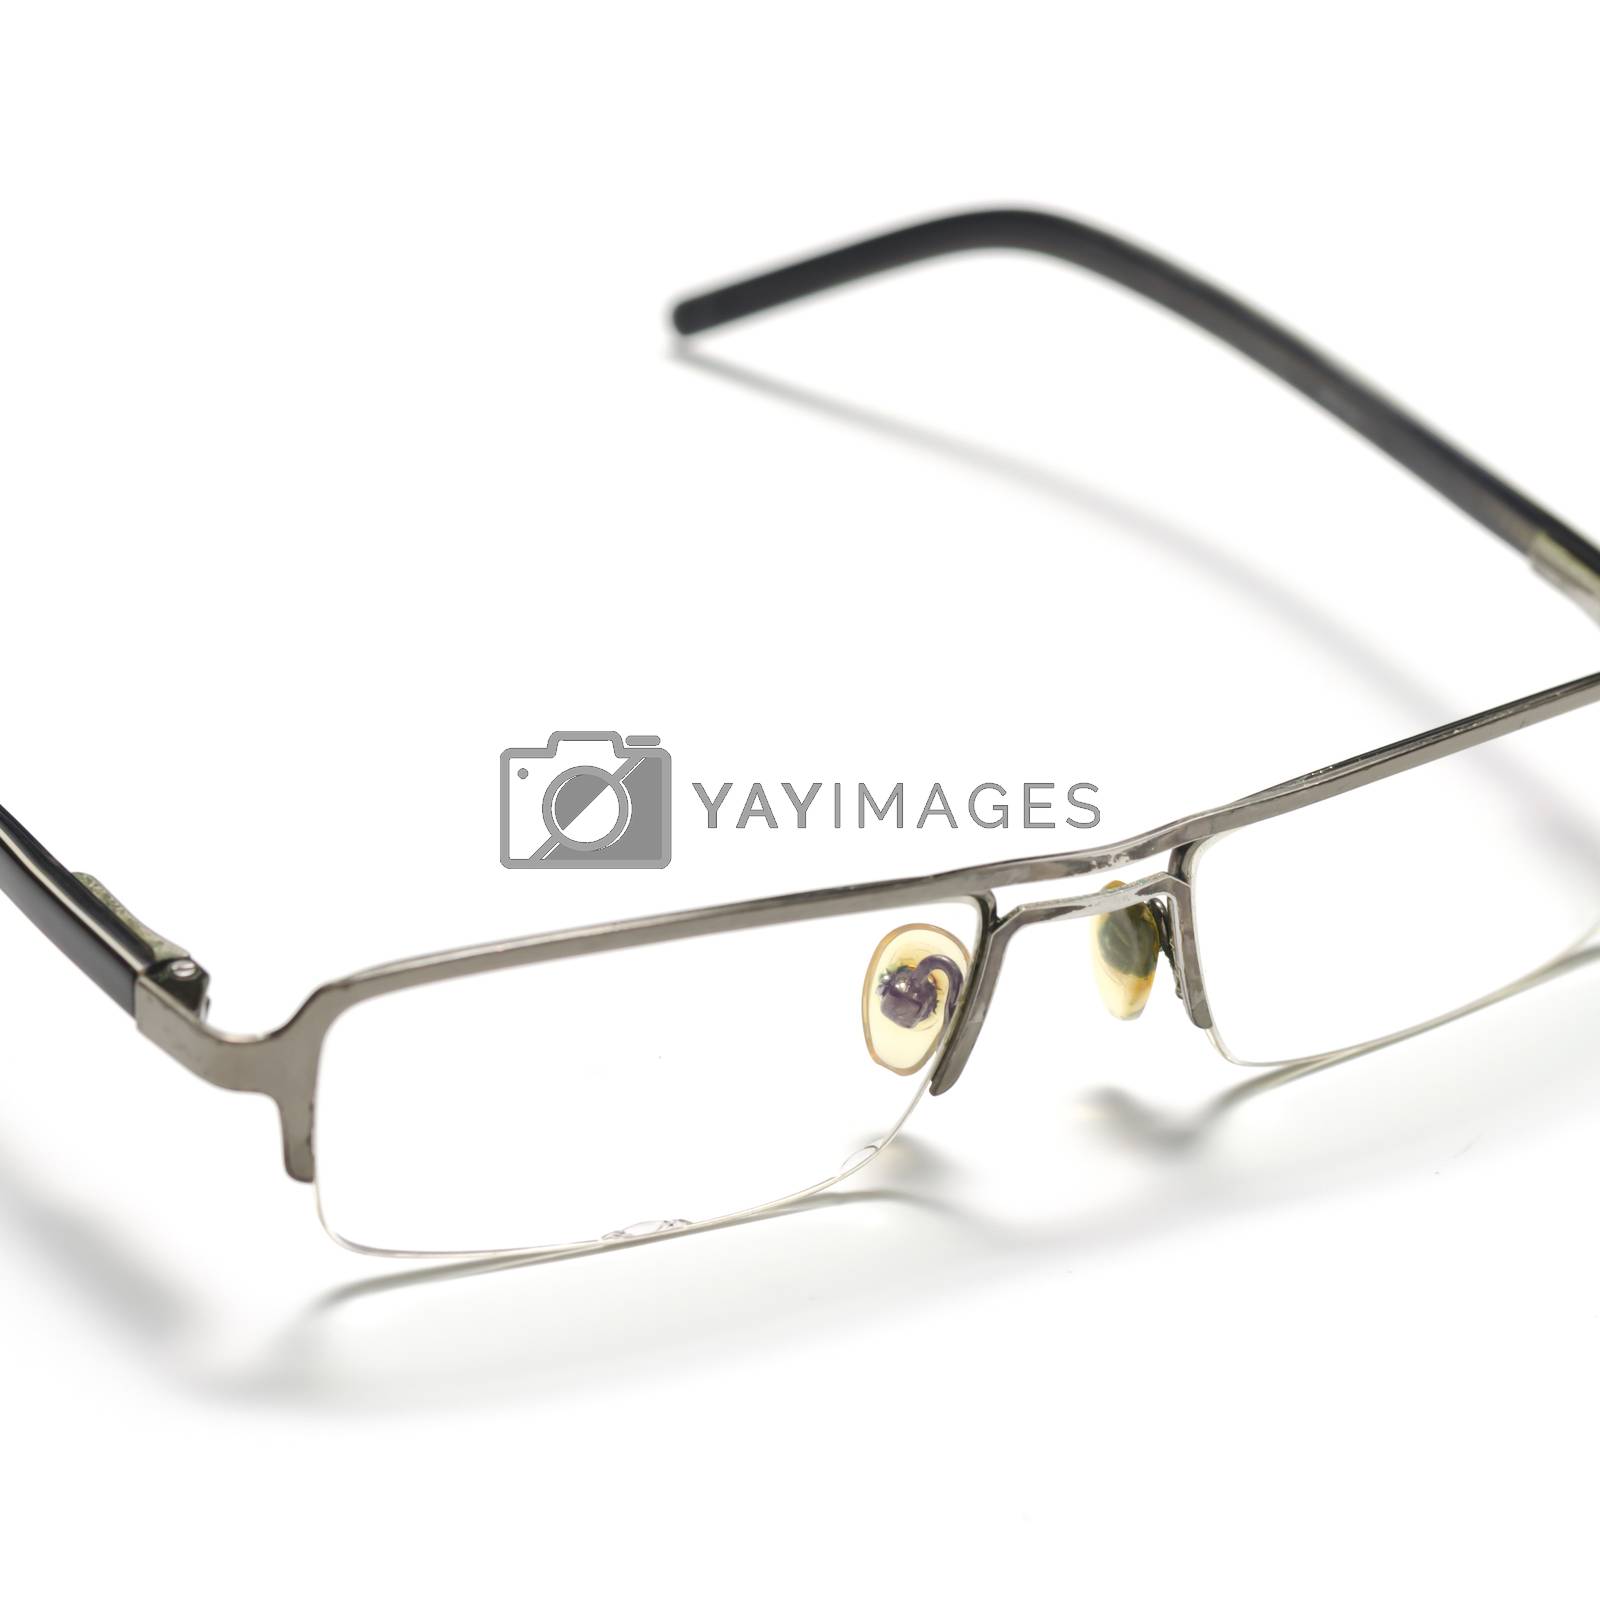 Royalty free image of glasses by ammza12